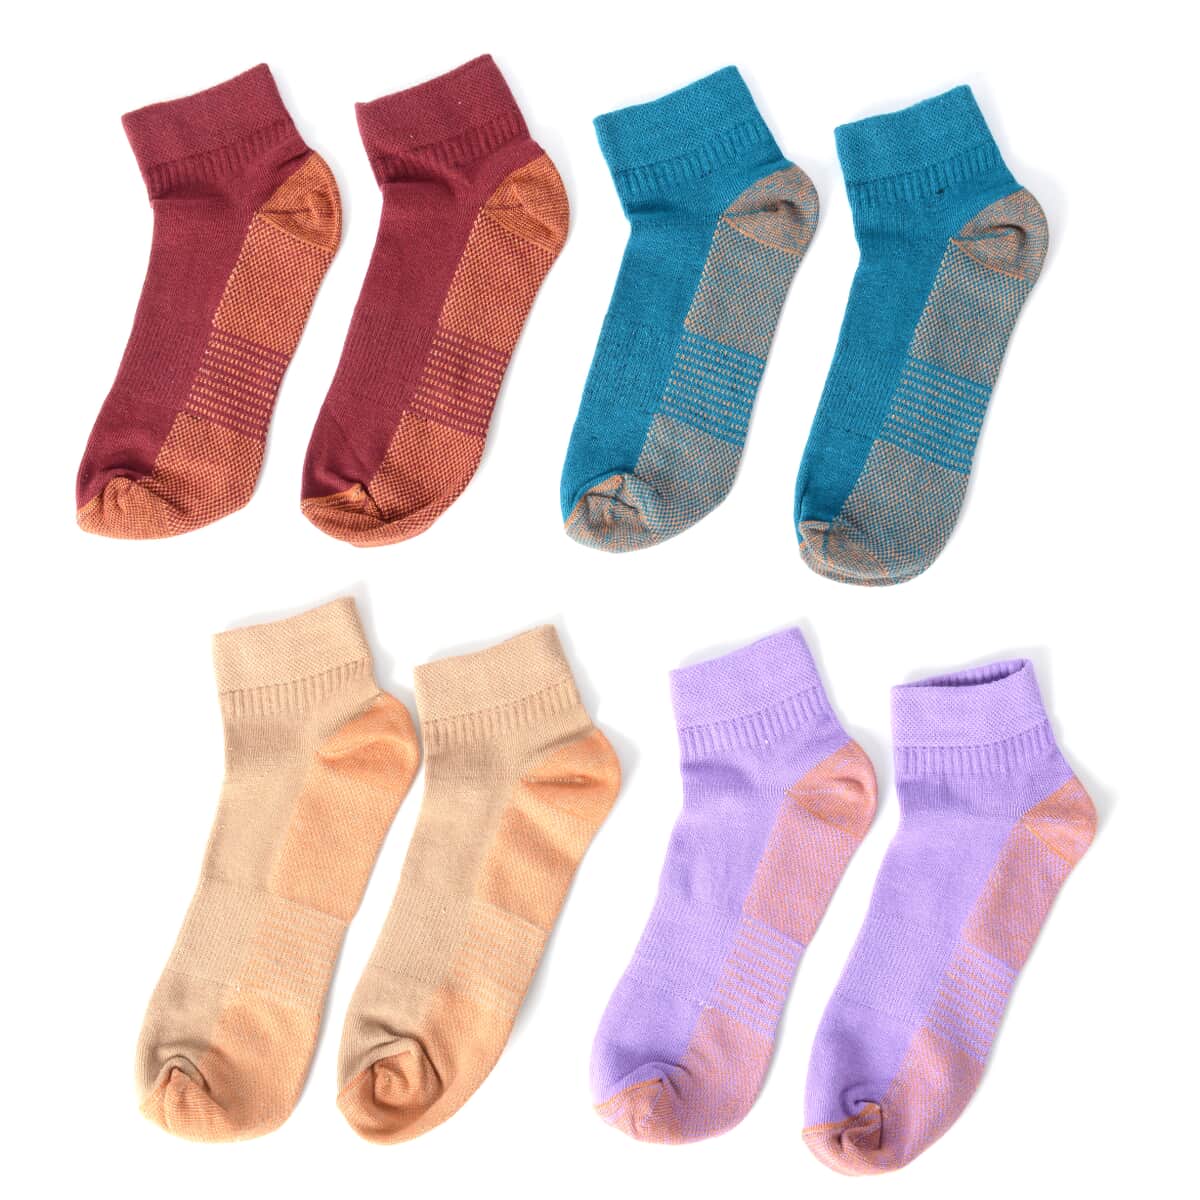 Set of 4 Pairs of Ankle Length Odor Free Copper Compression Socks For Men And Women, Premium Material Moisture Wicking Unisex Copper Infused Socks - Lavender, Teal, Beige, Wine (L/XL) image number 0